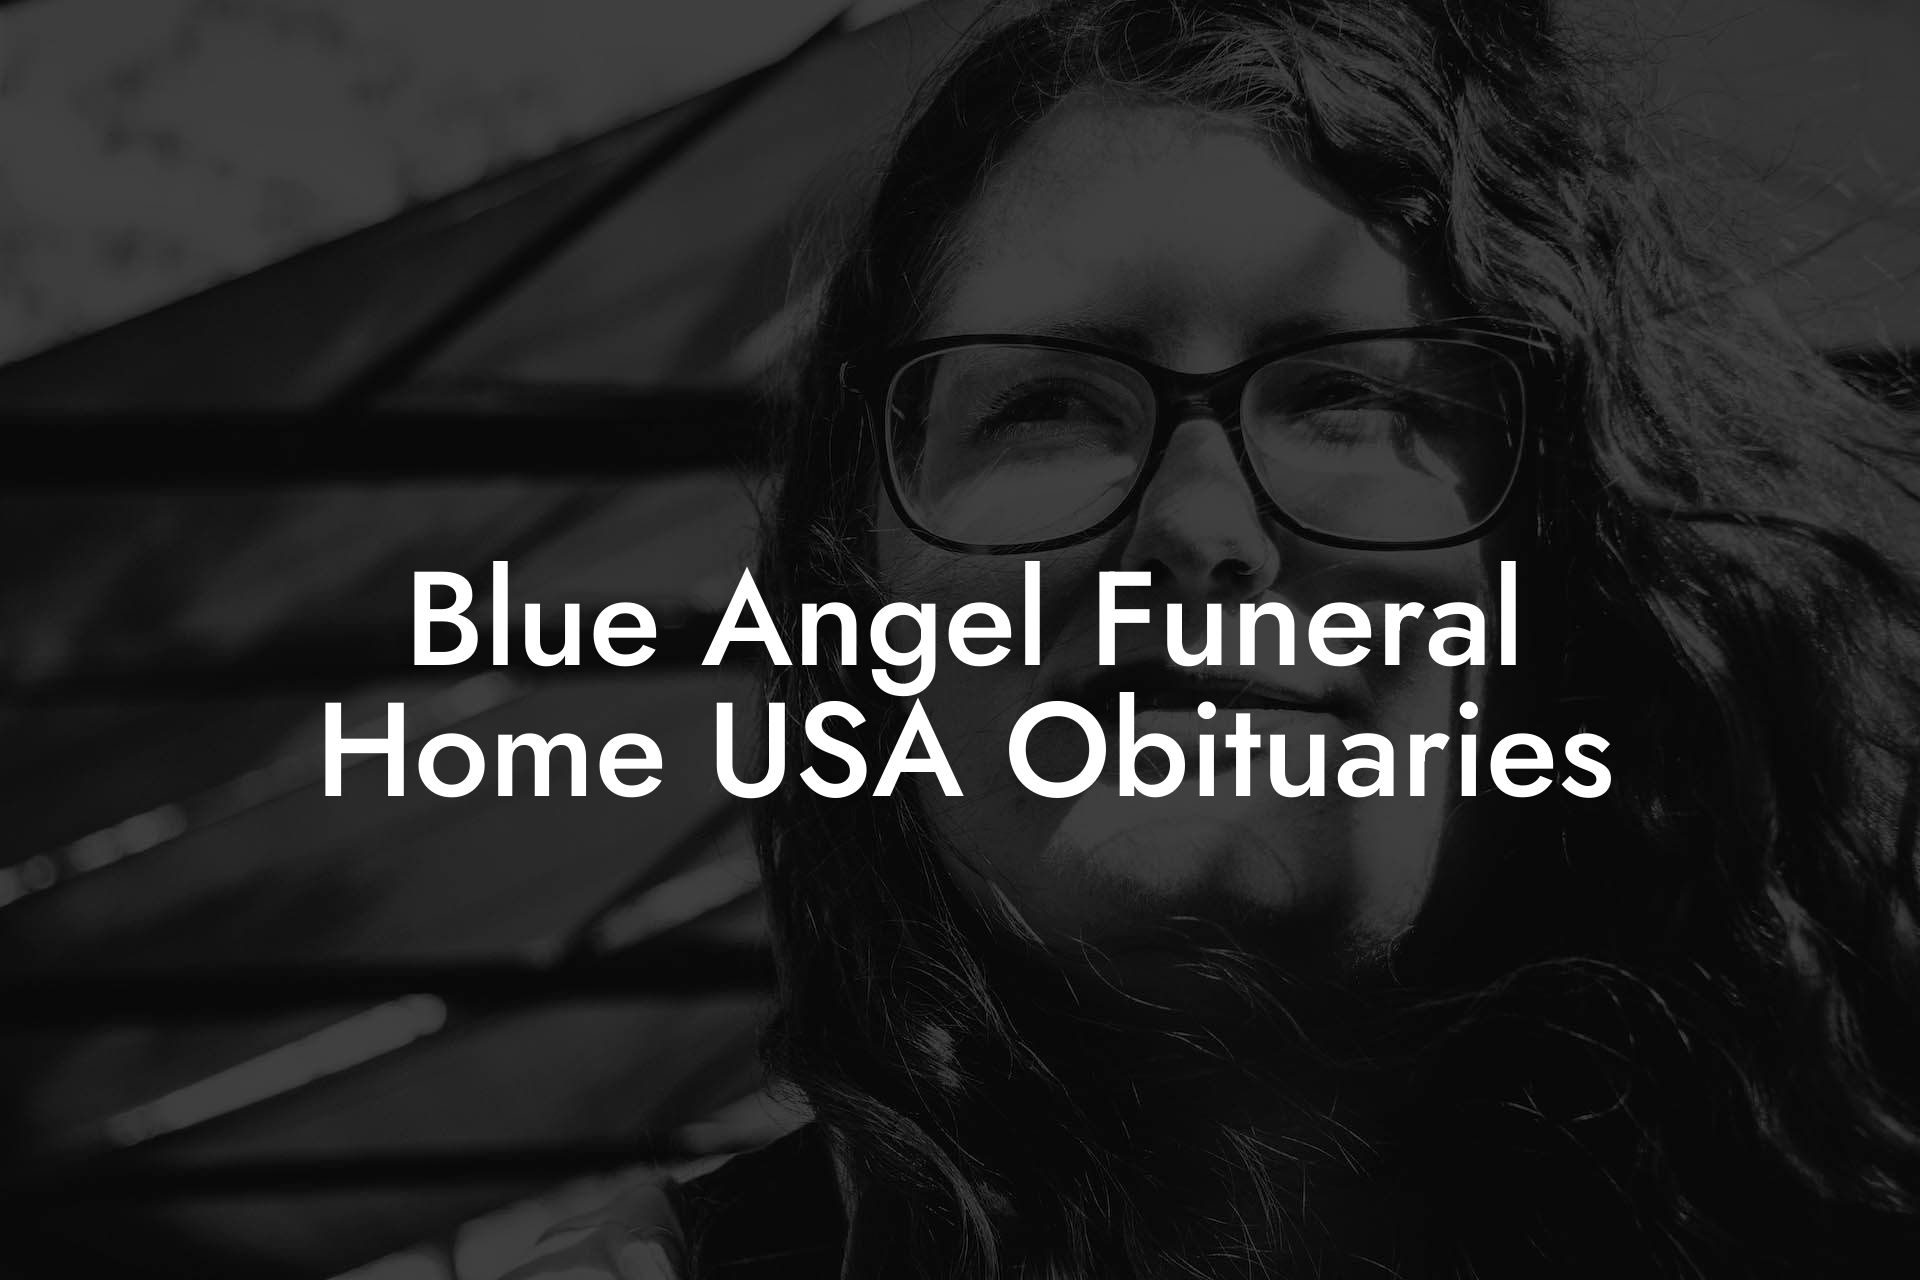 Blue Angel Funeral Home USA Obituaries